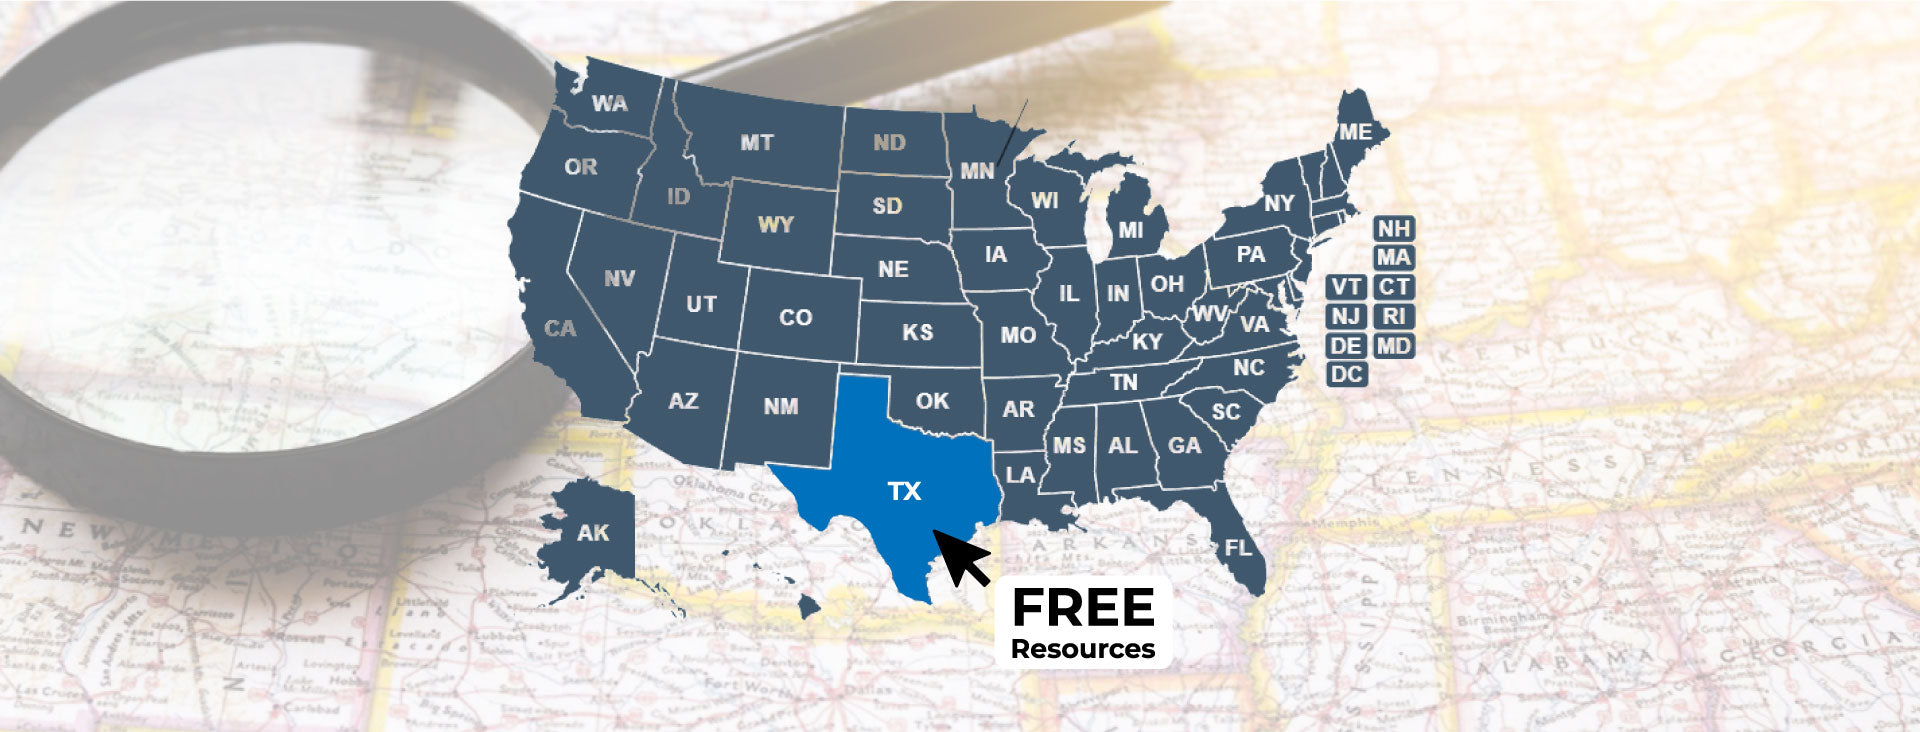 State Free Resources Map